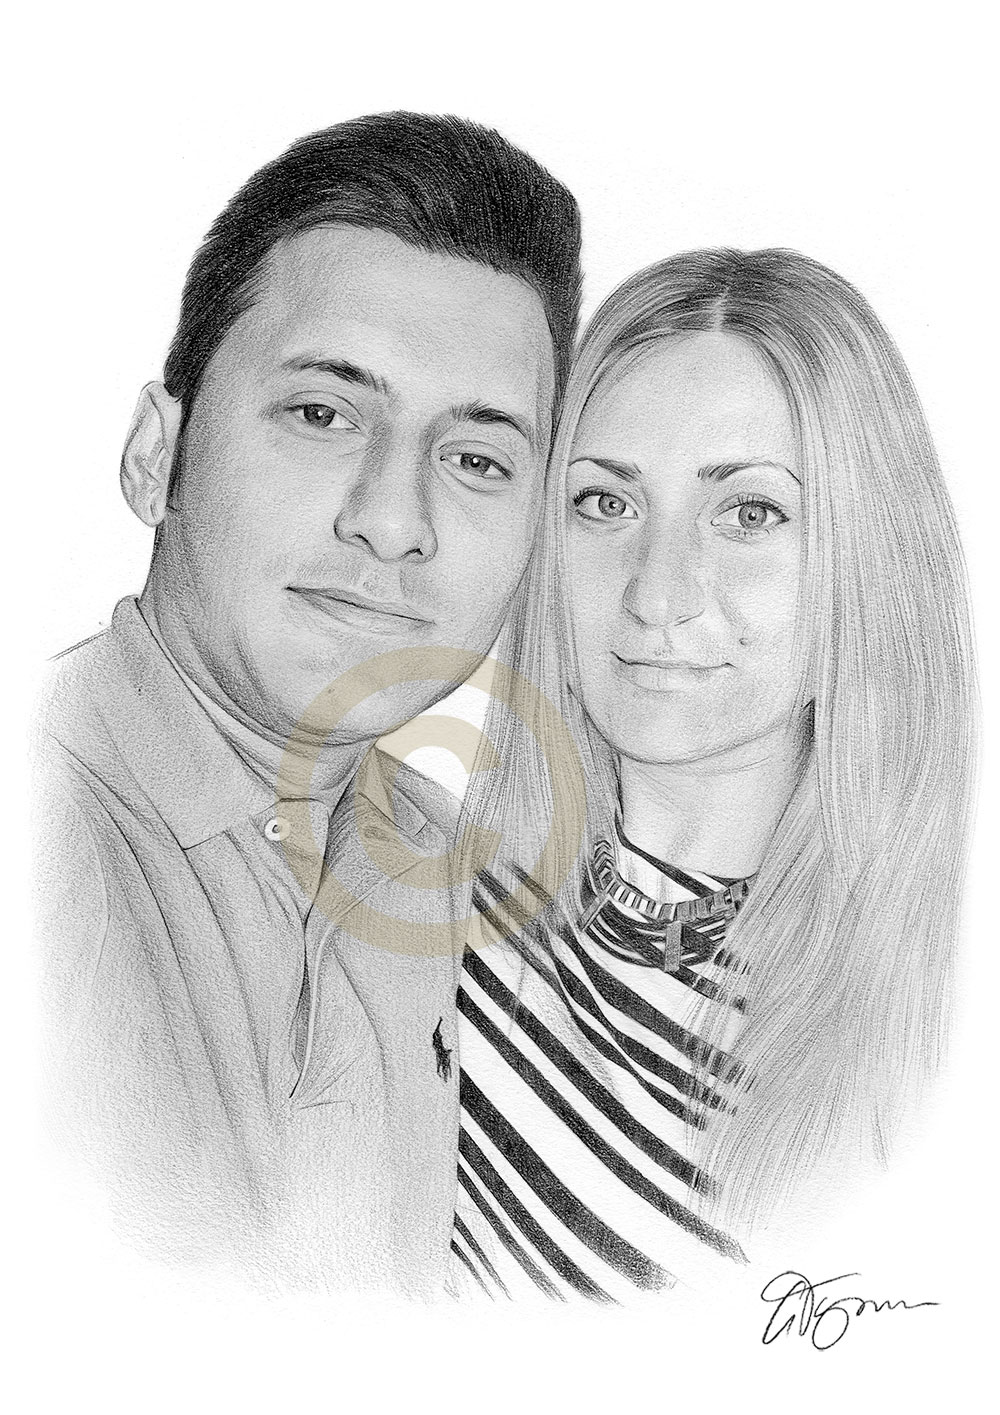 Pencil drawing commission of a happy couple by artist Gary Tymon